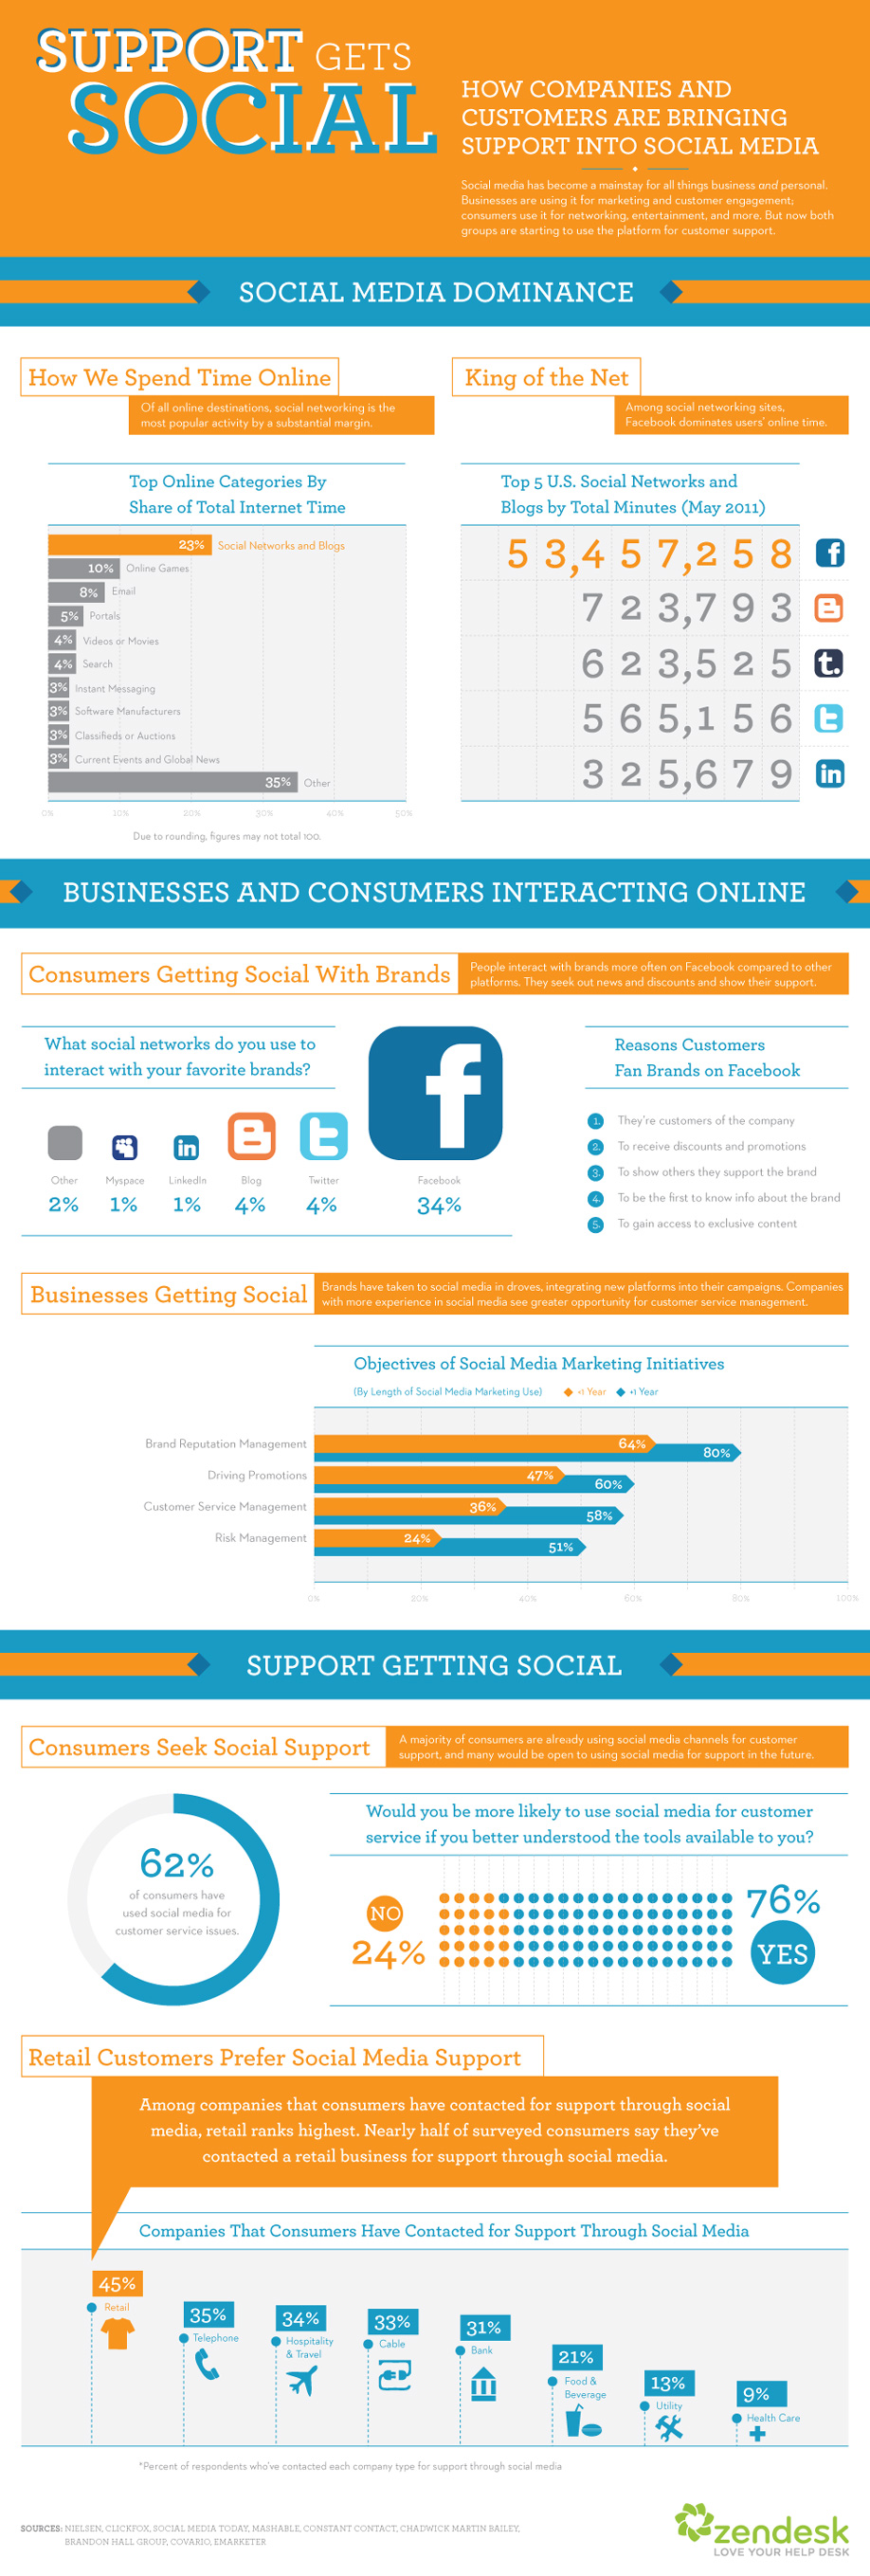 Social Media and the Future of Customer Support